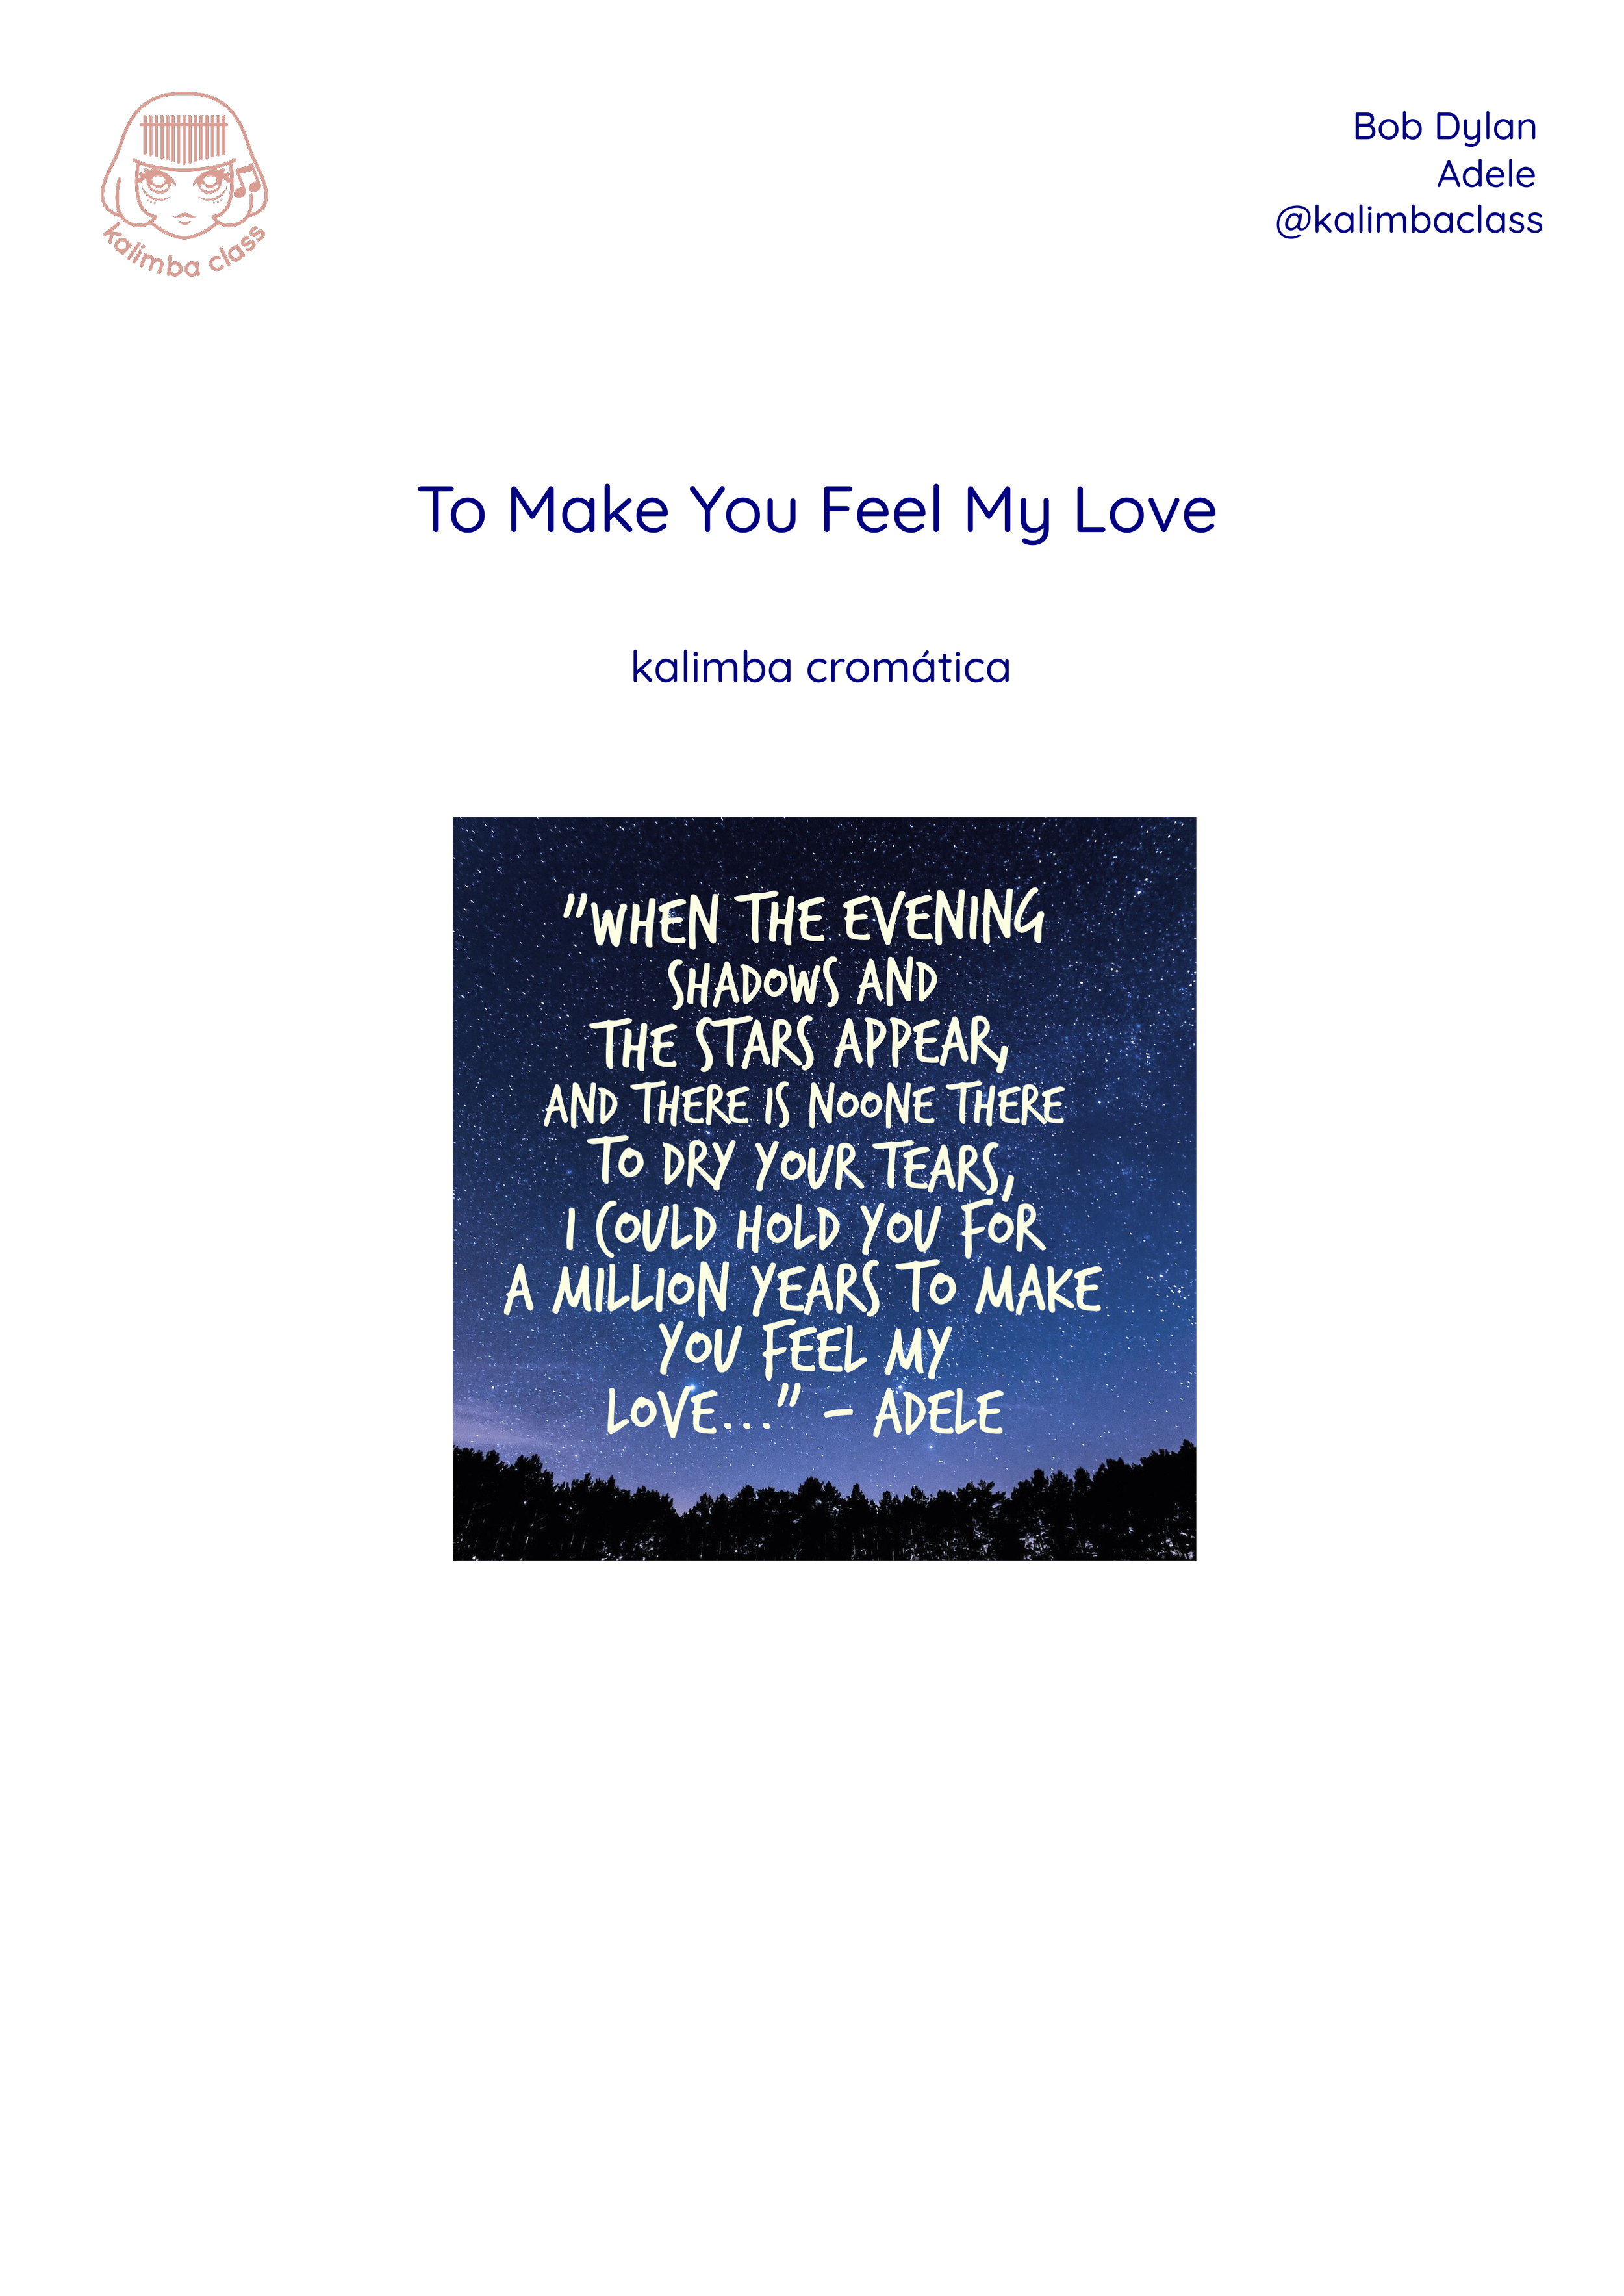 To Make You Feel My Love, Adele by Bob Dylan